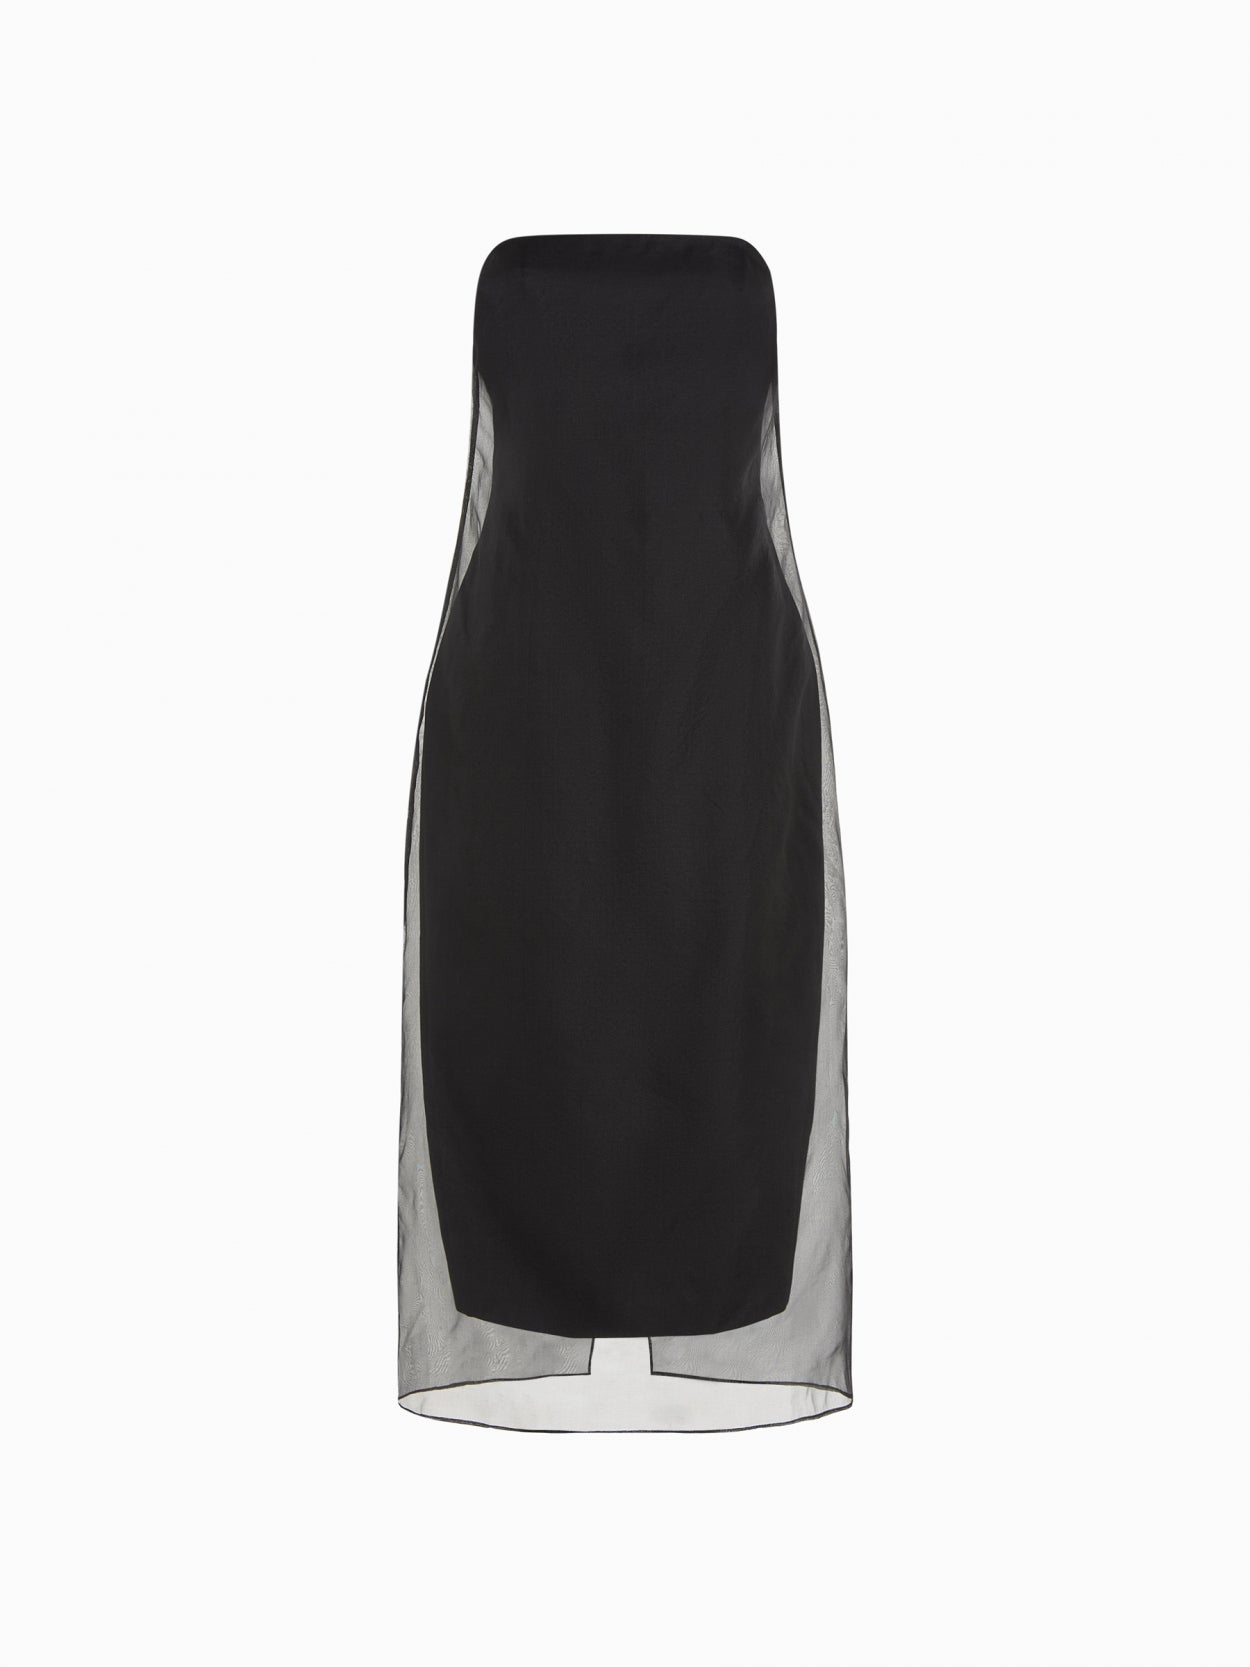 front packshot of a black strapless dress with veil